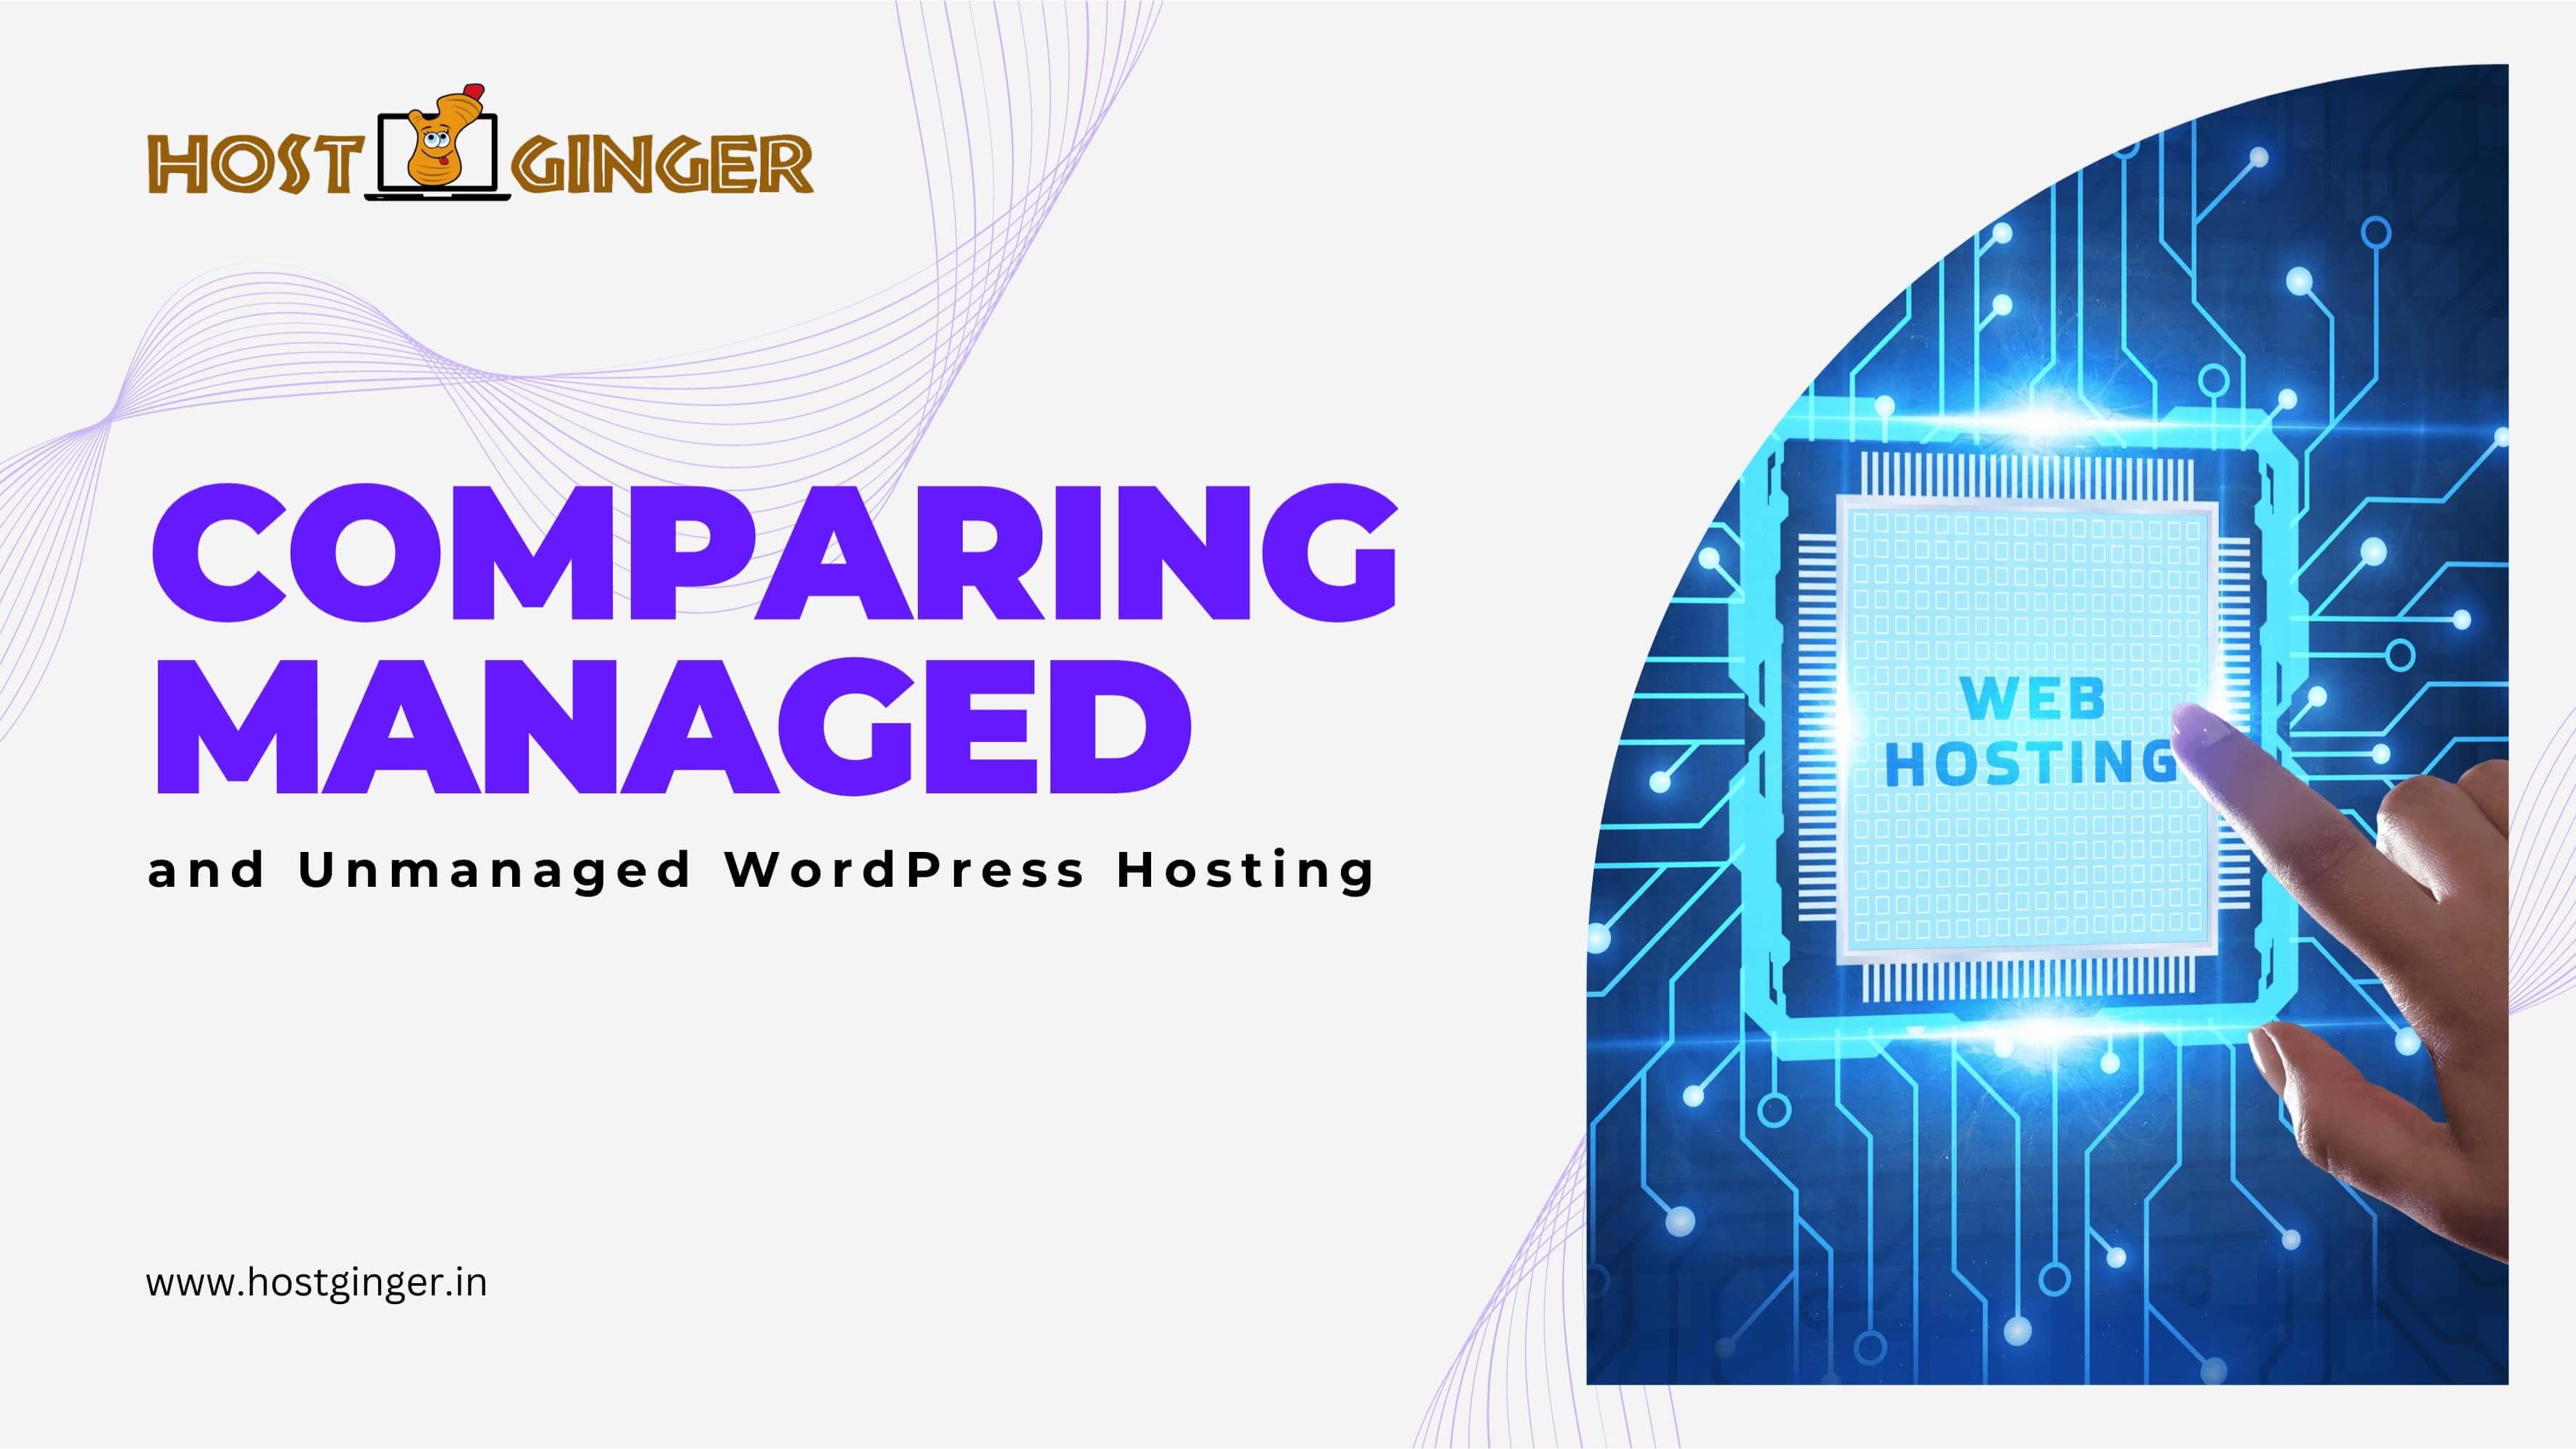 Comparing Managed and Unmanaged WordPress Hosting